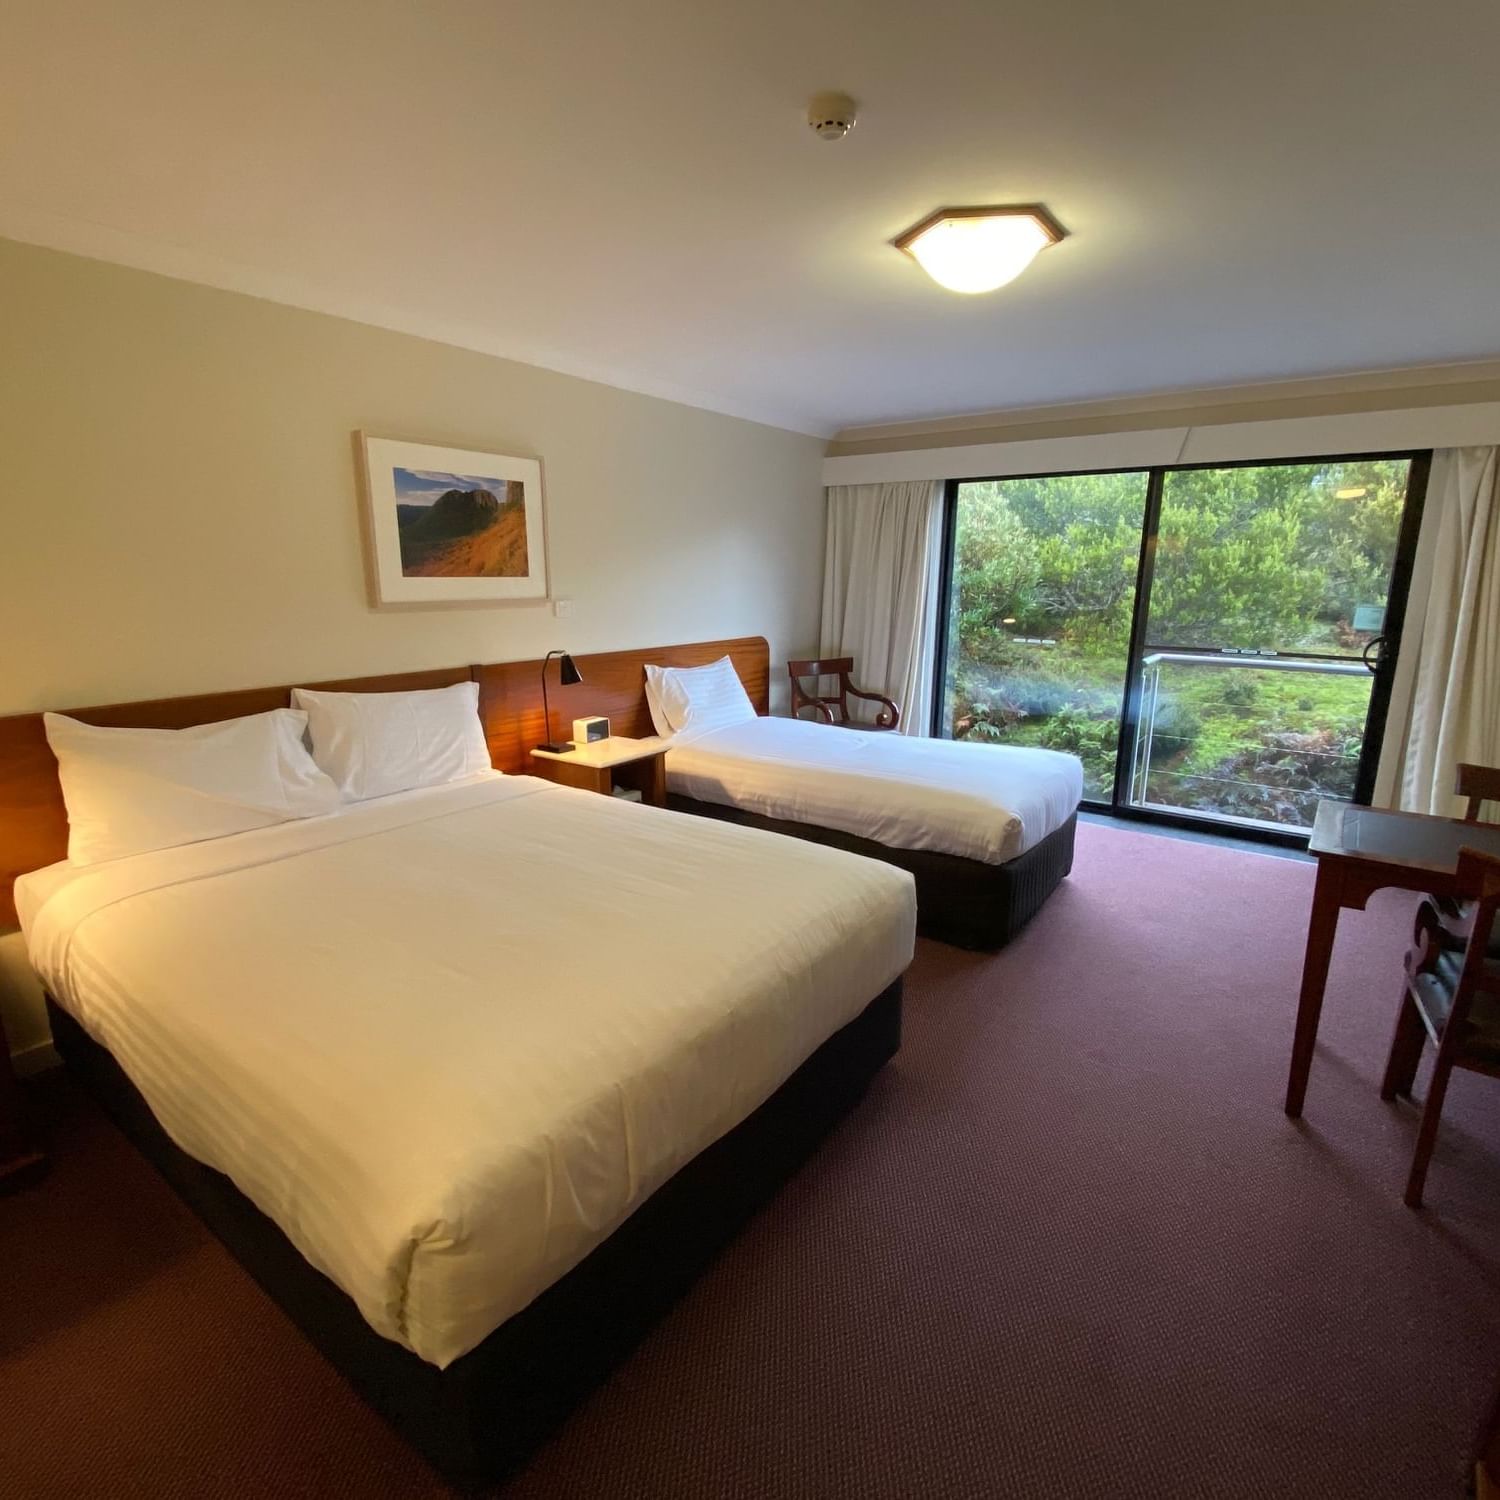 Standard Room with 2 queen beds at Cradle Mountain Hotel